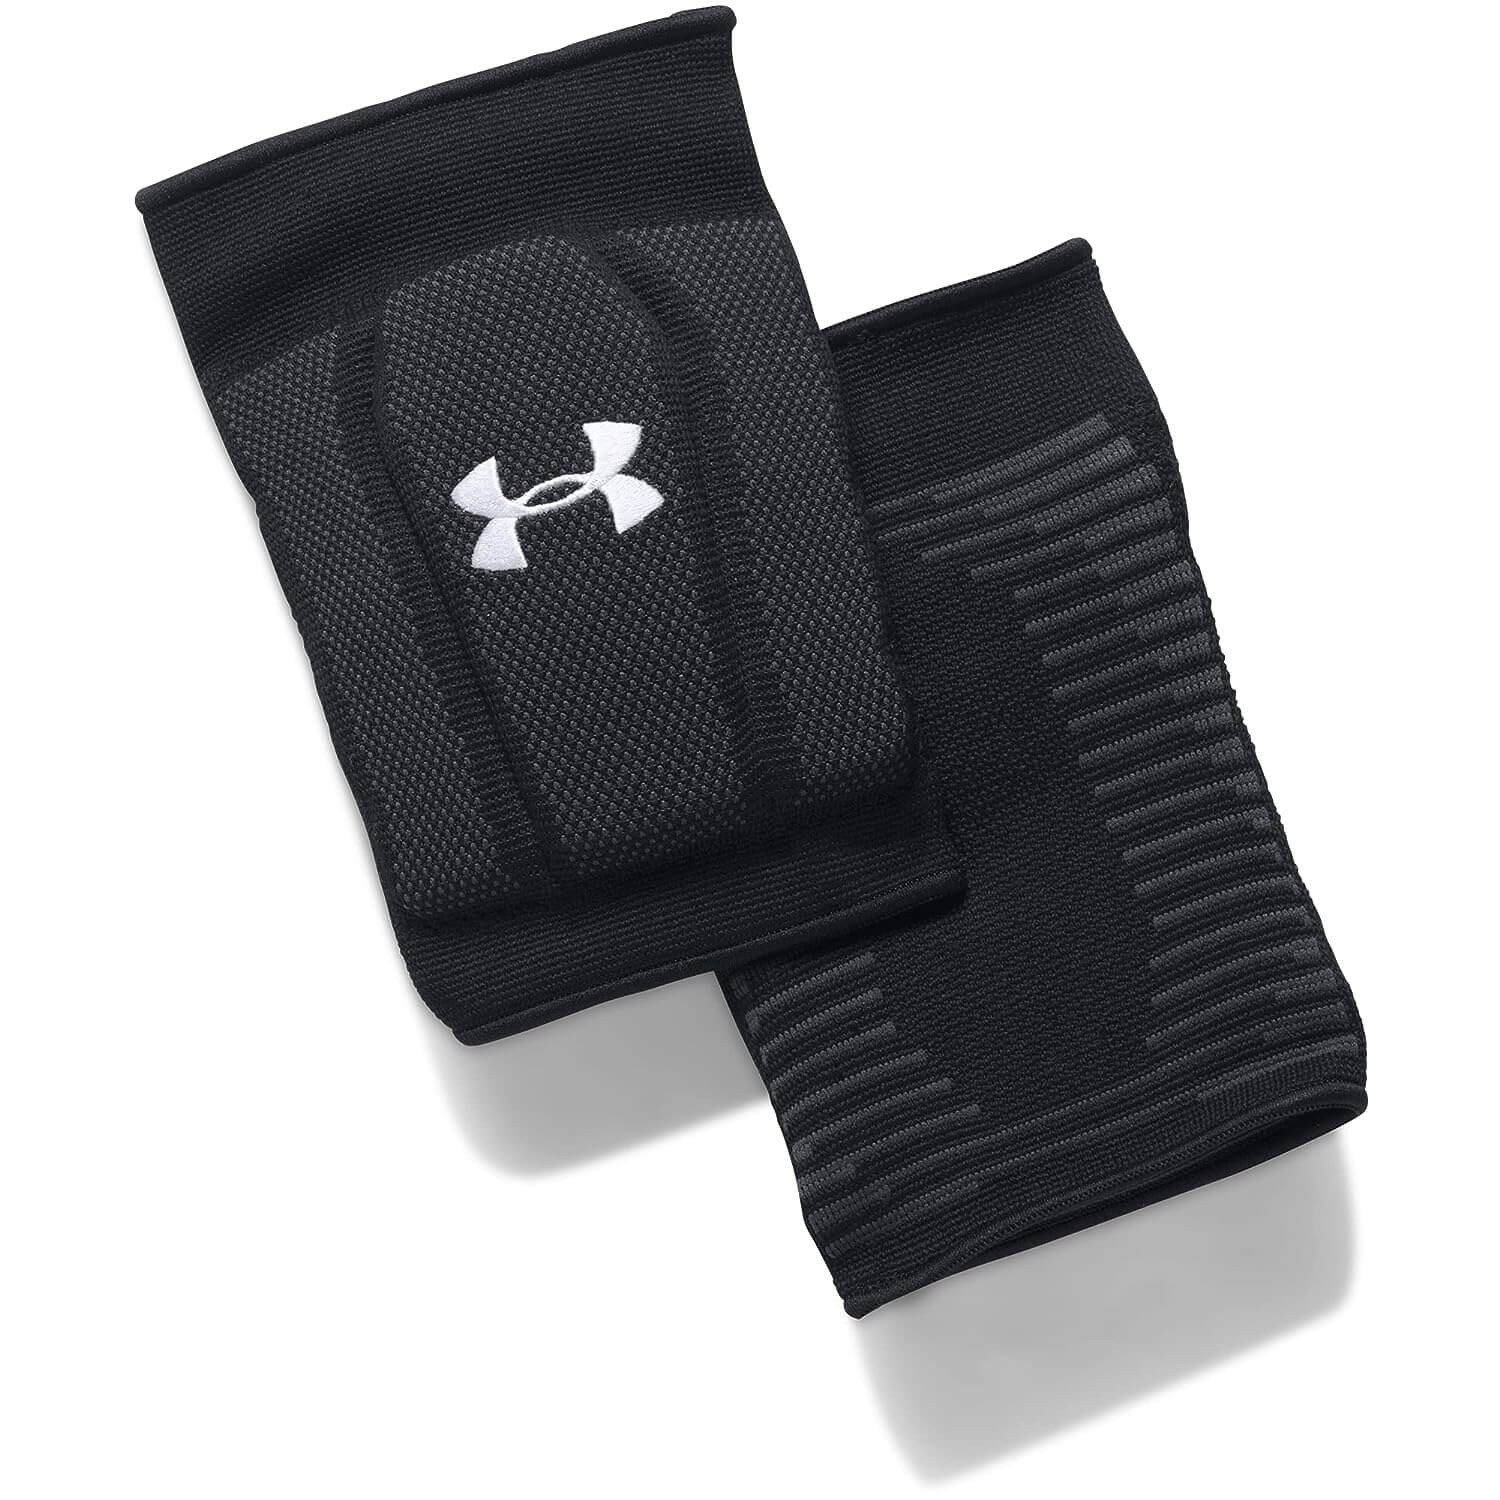  Under Armour 2.0 Volleyball Knee Pads